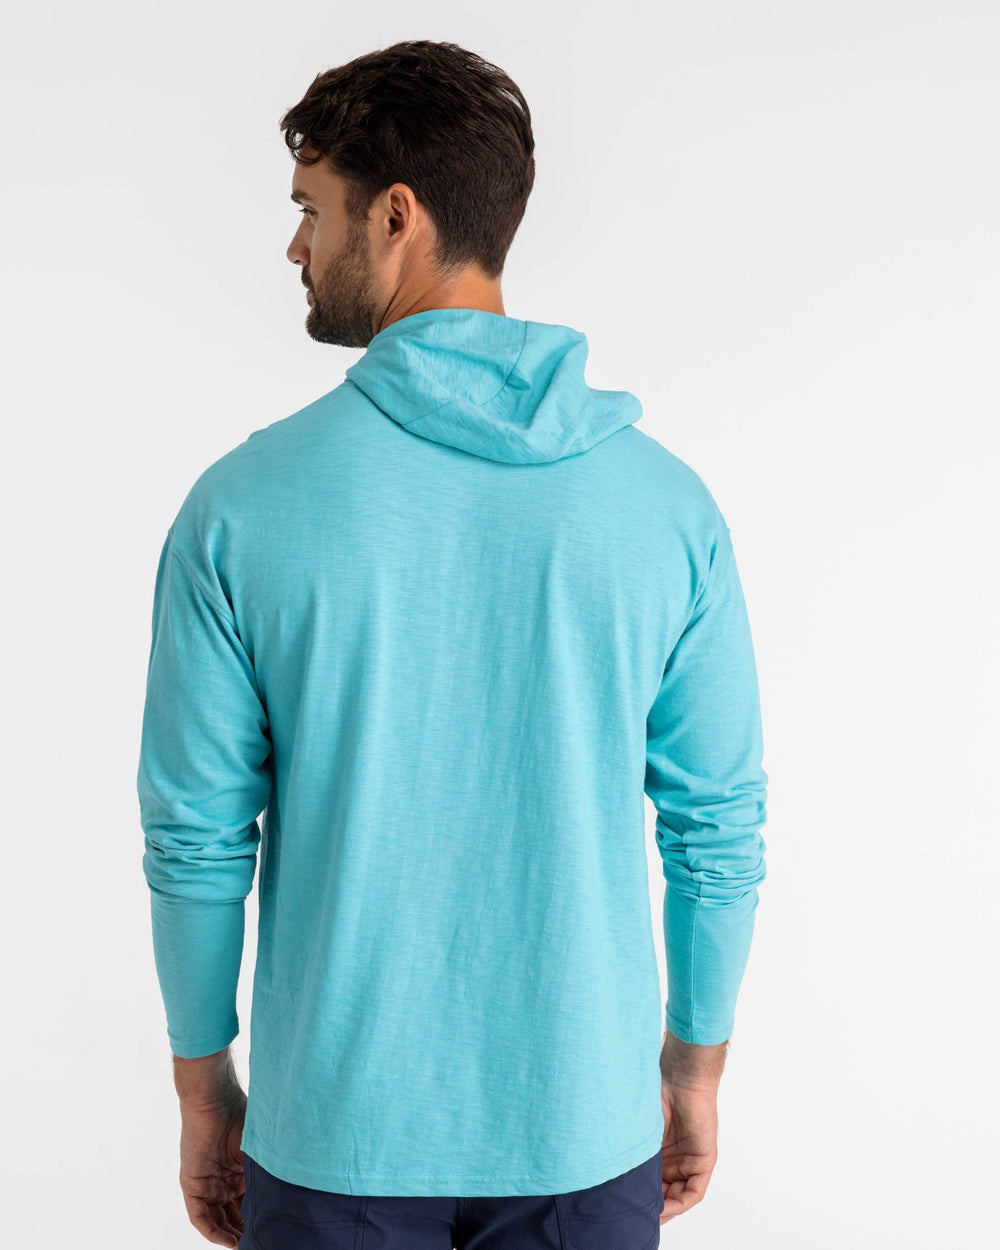 The back view of the Southern Tide Andreas Sun Farer Hoodie by Southern Tide - Tidal Wave